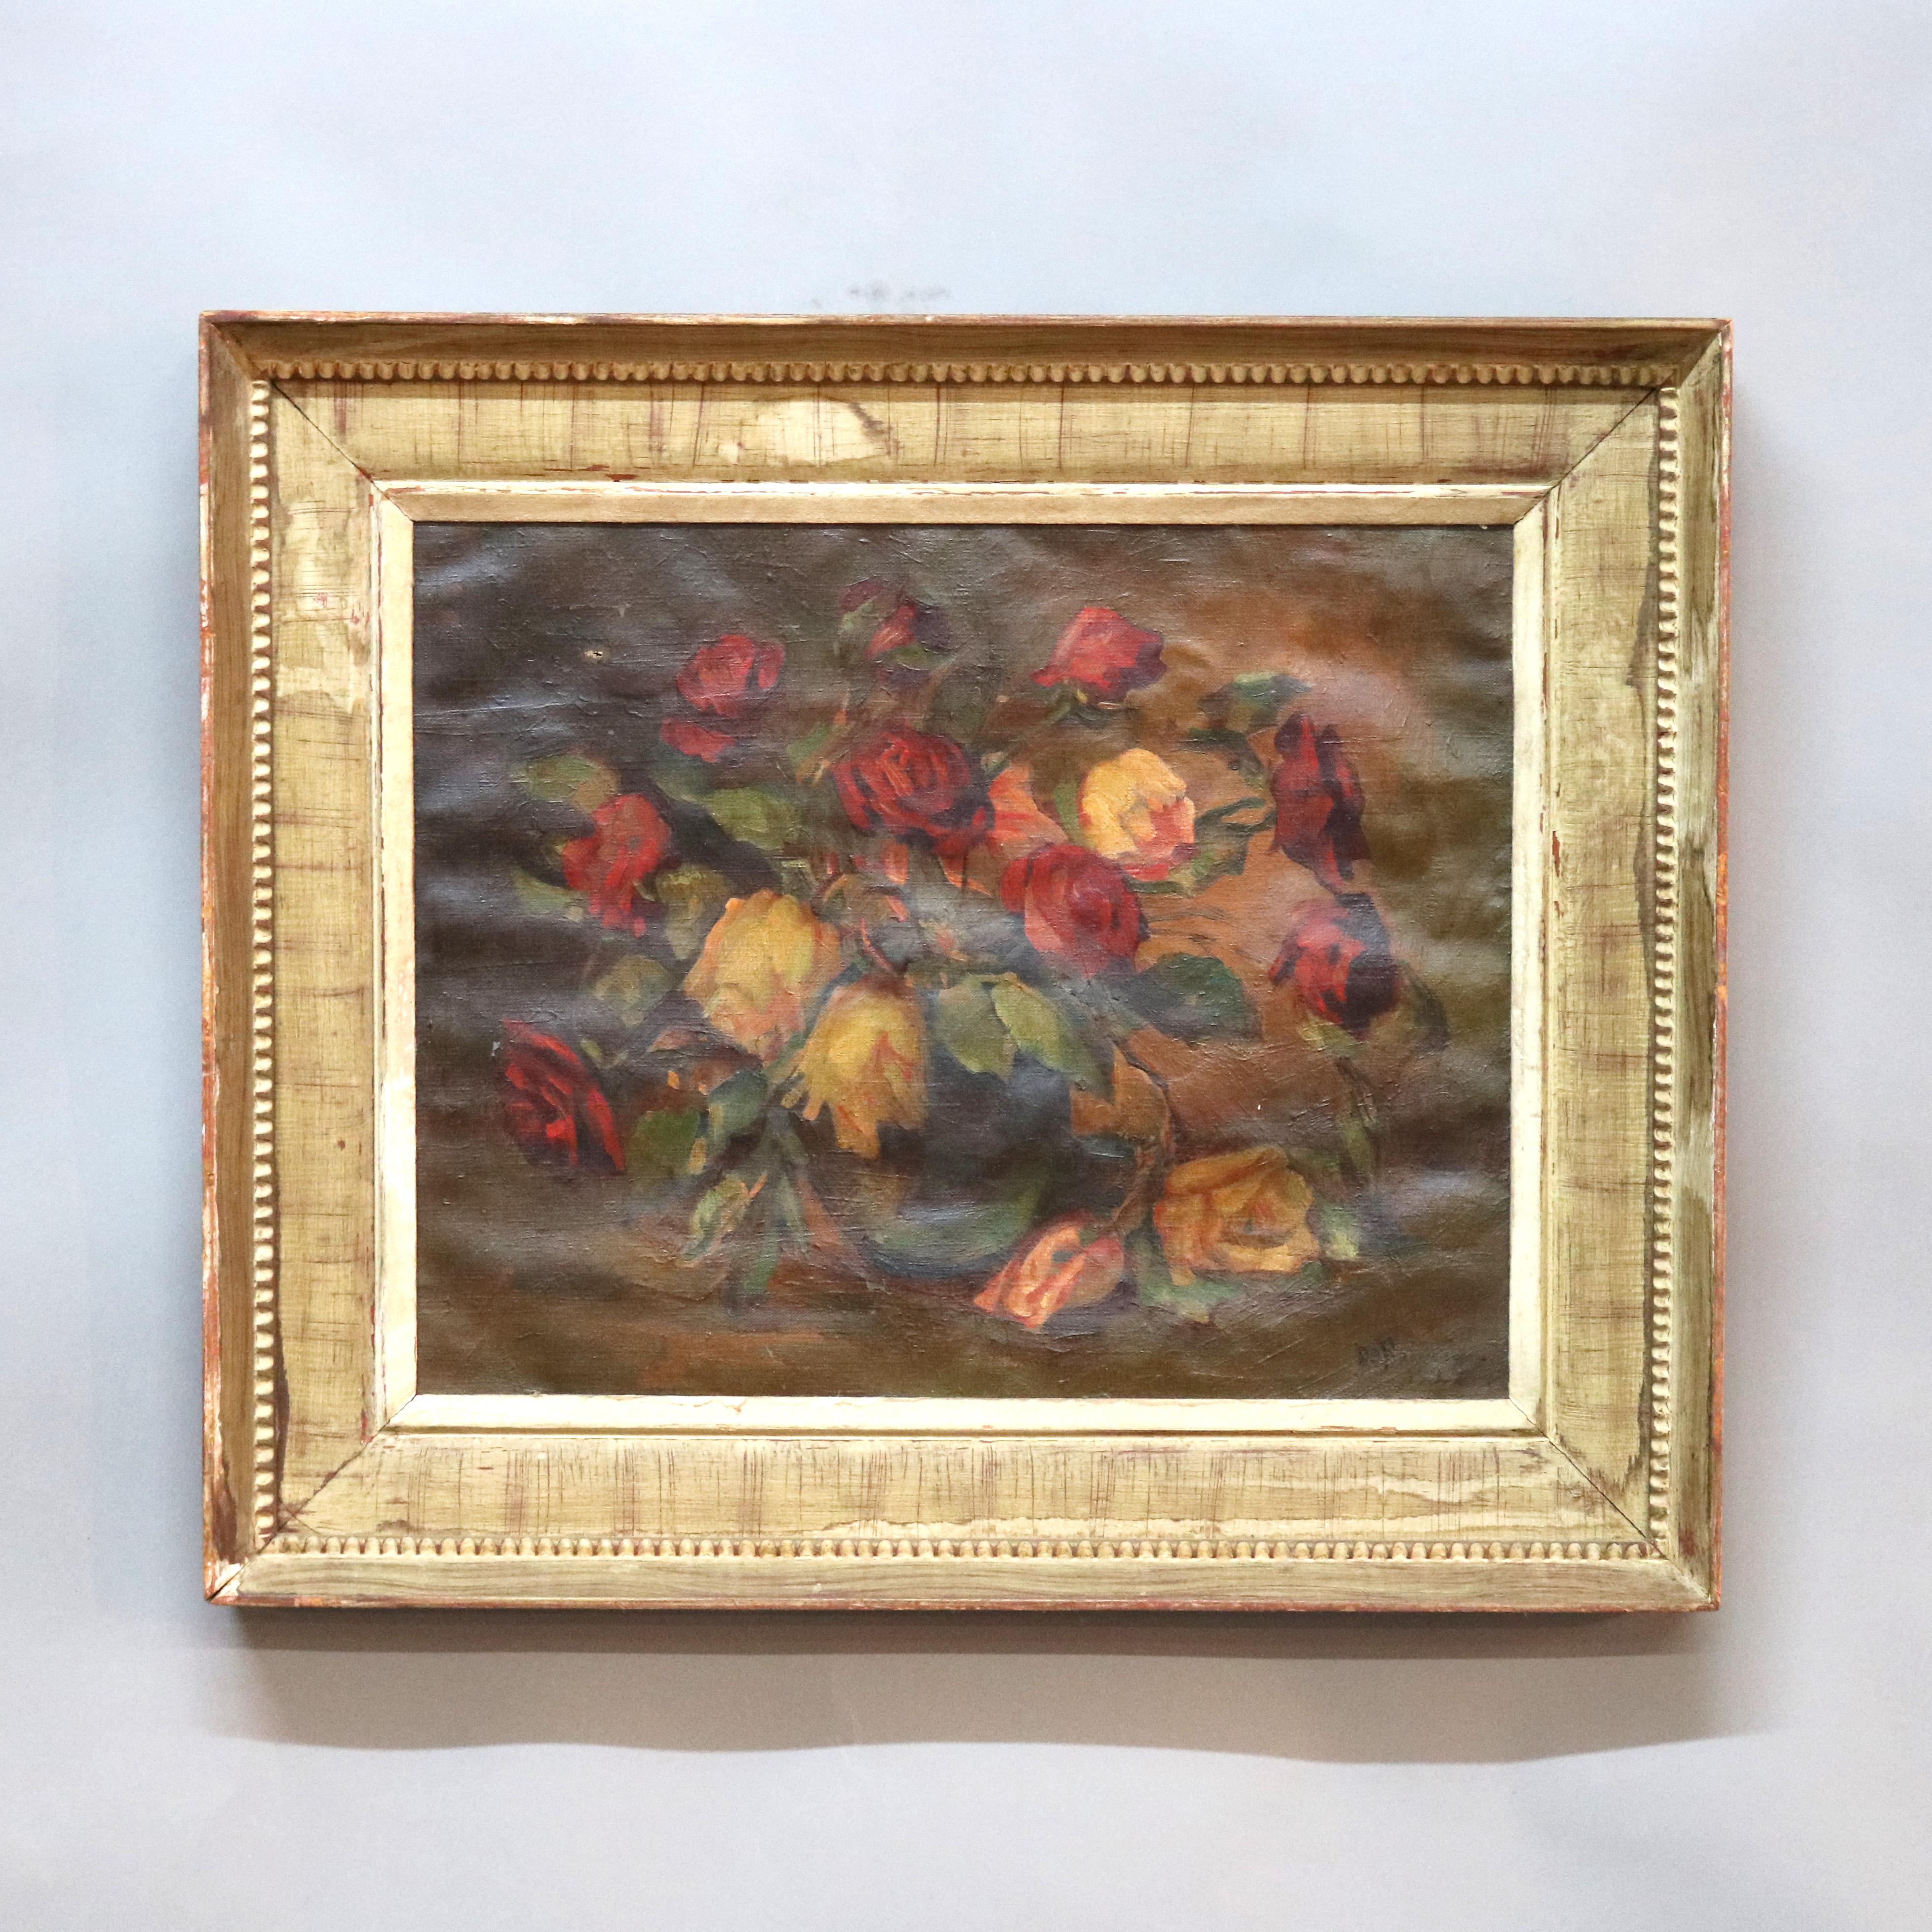 An antique still life painting by DeFrancisco offers oil on canvas still life of roses, artist signed and dated lower left, seated in giltwood frame, 1925

Measures: overall 22.25